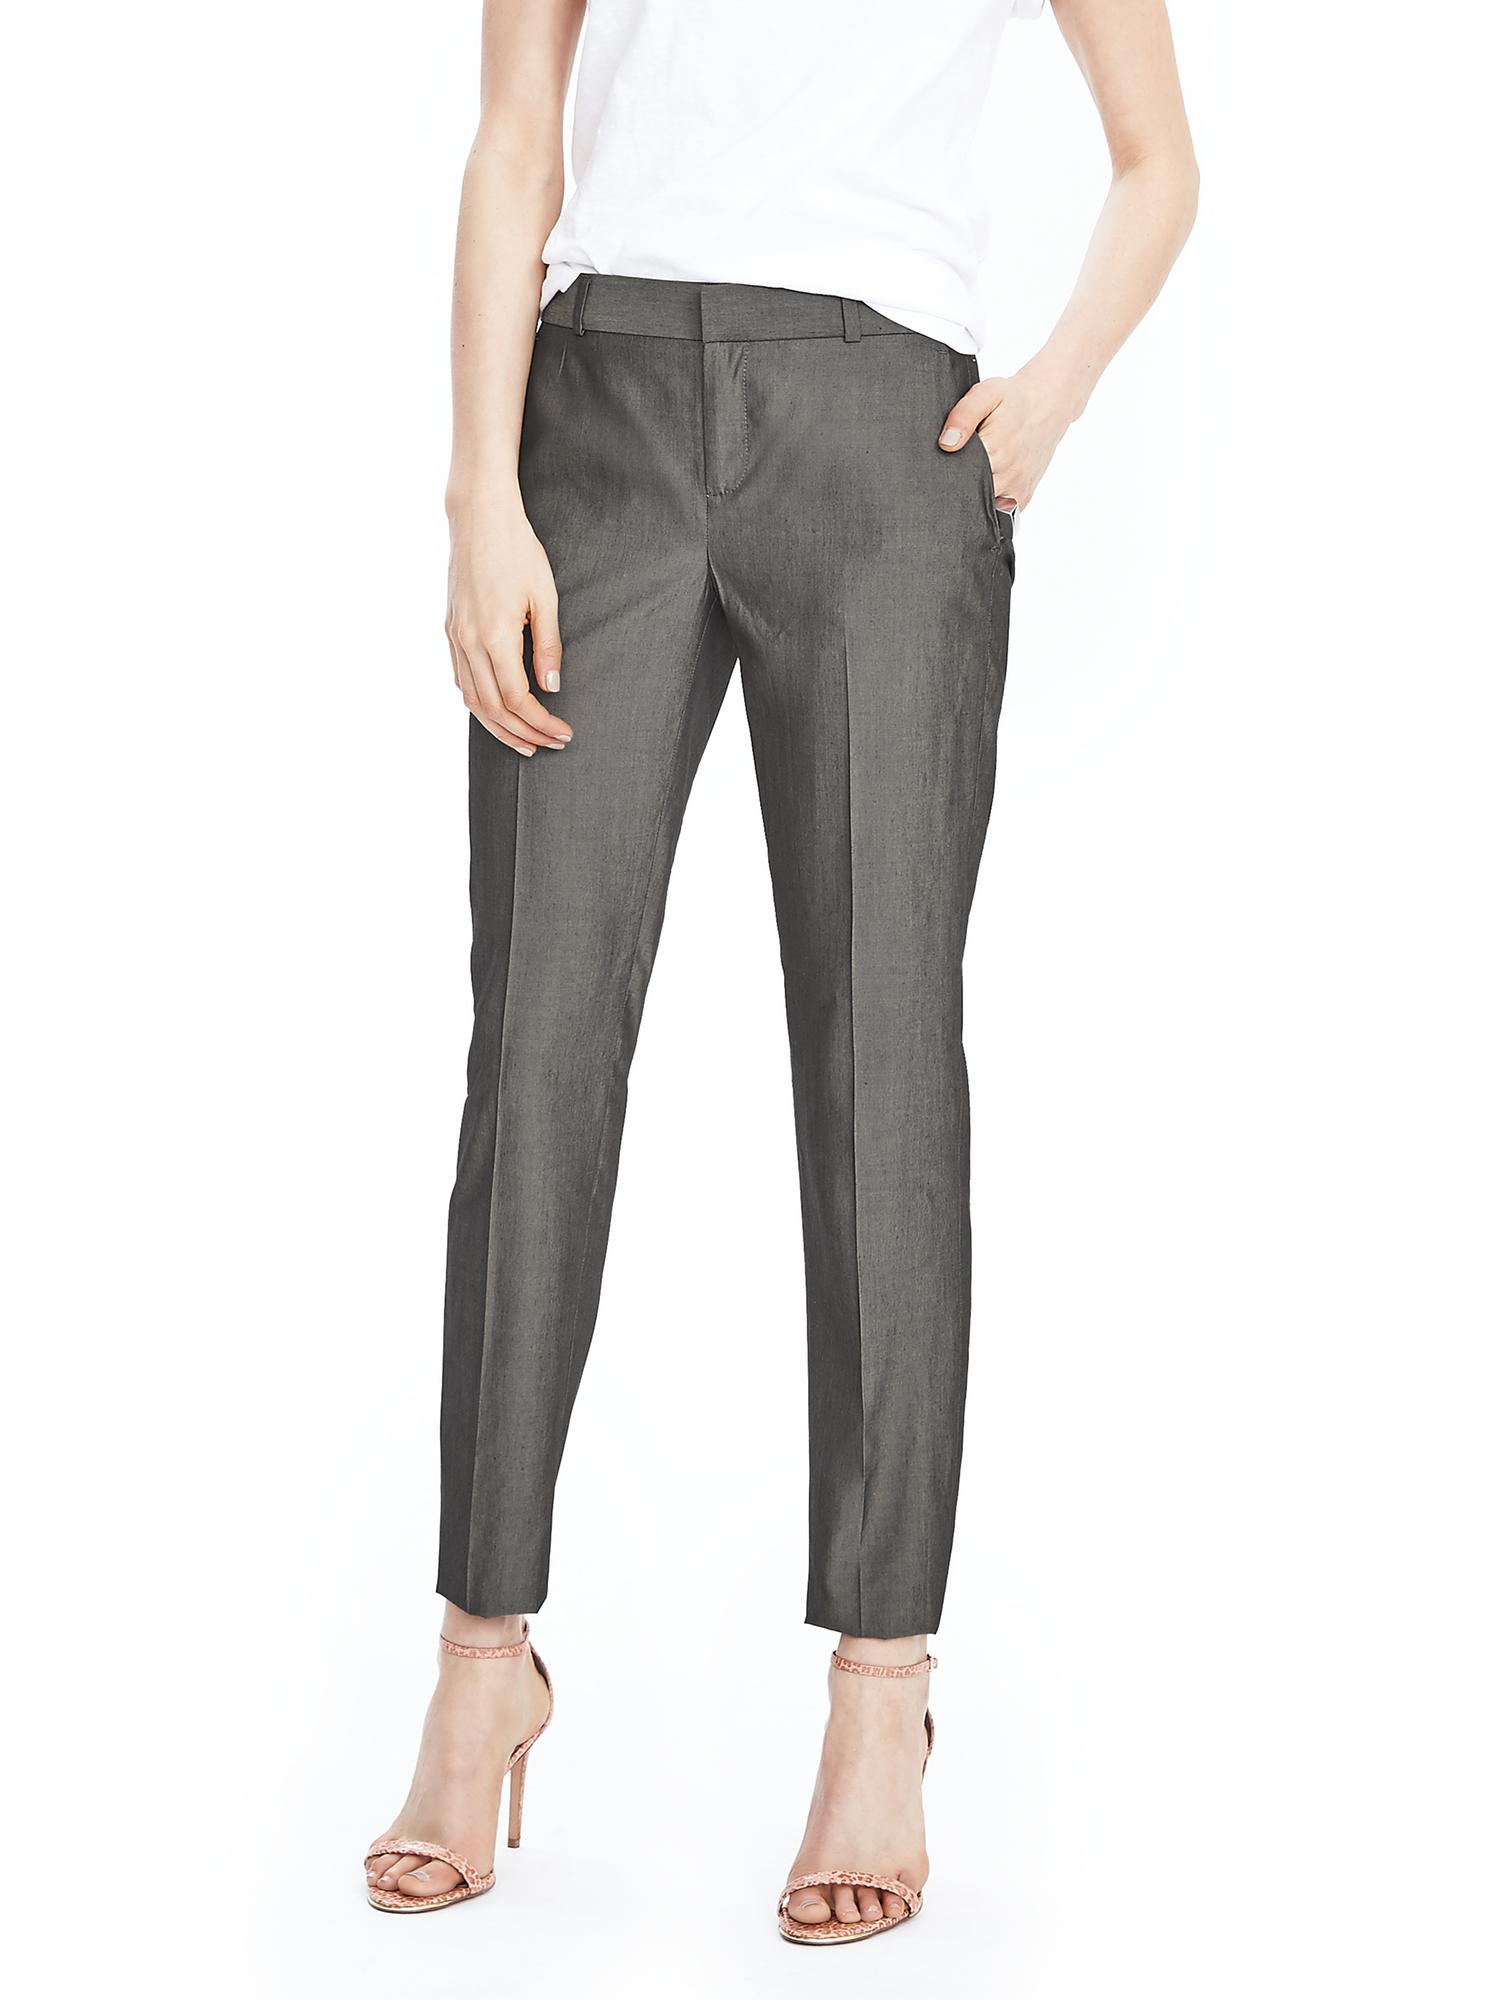 Avery-Fit Silk Blend Pant